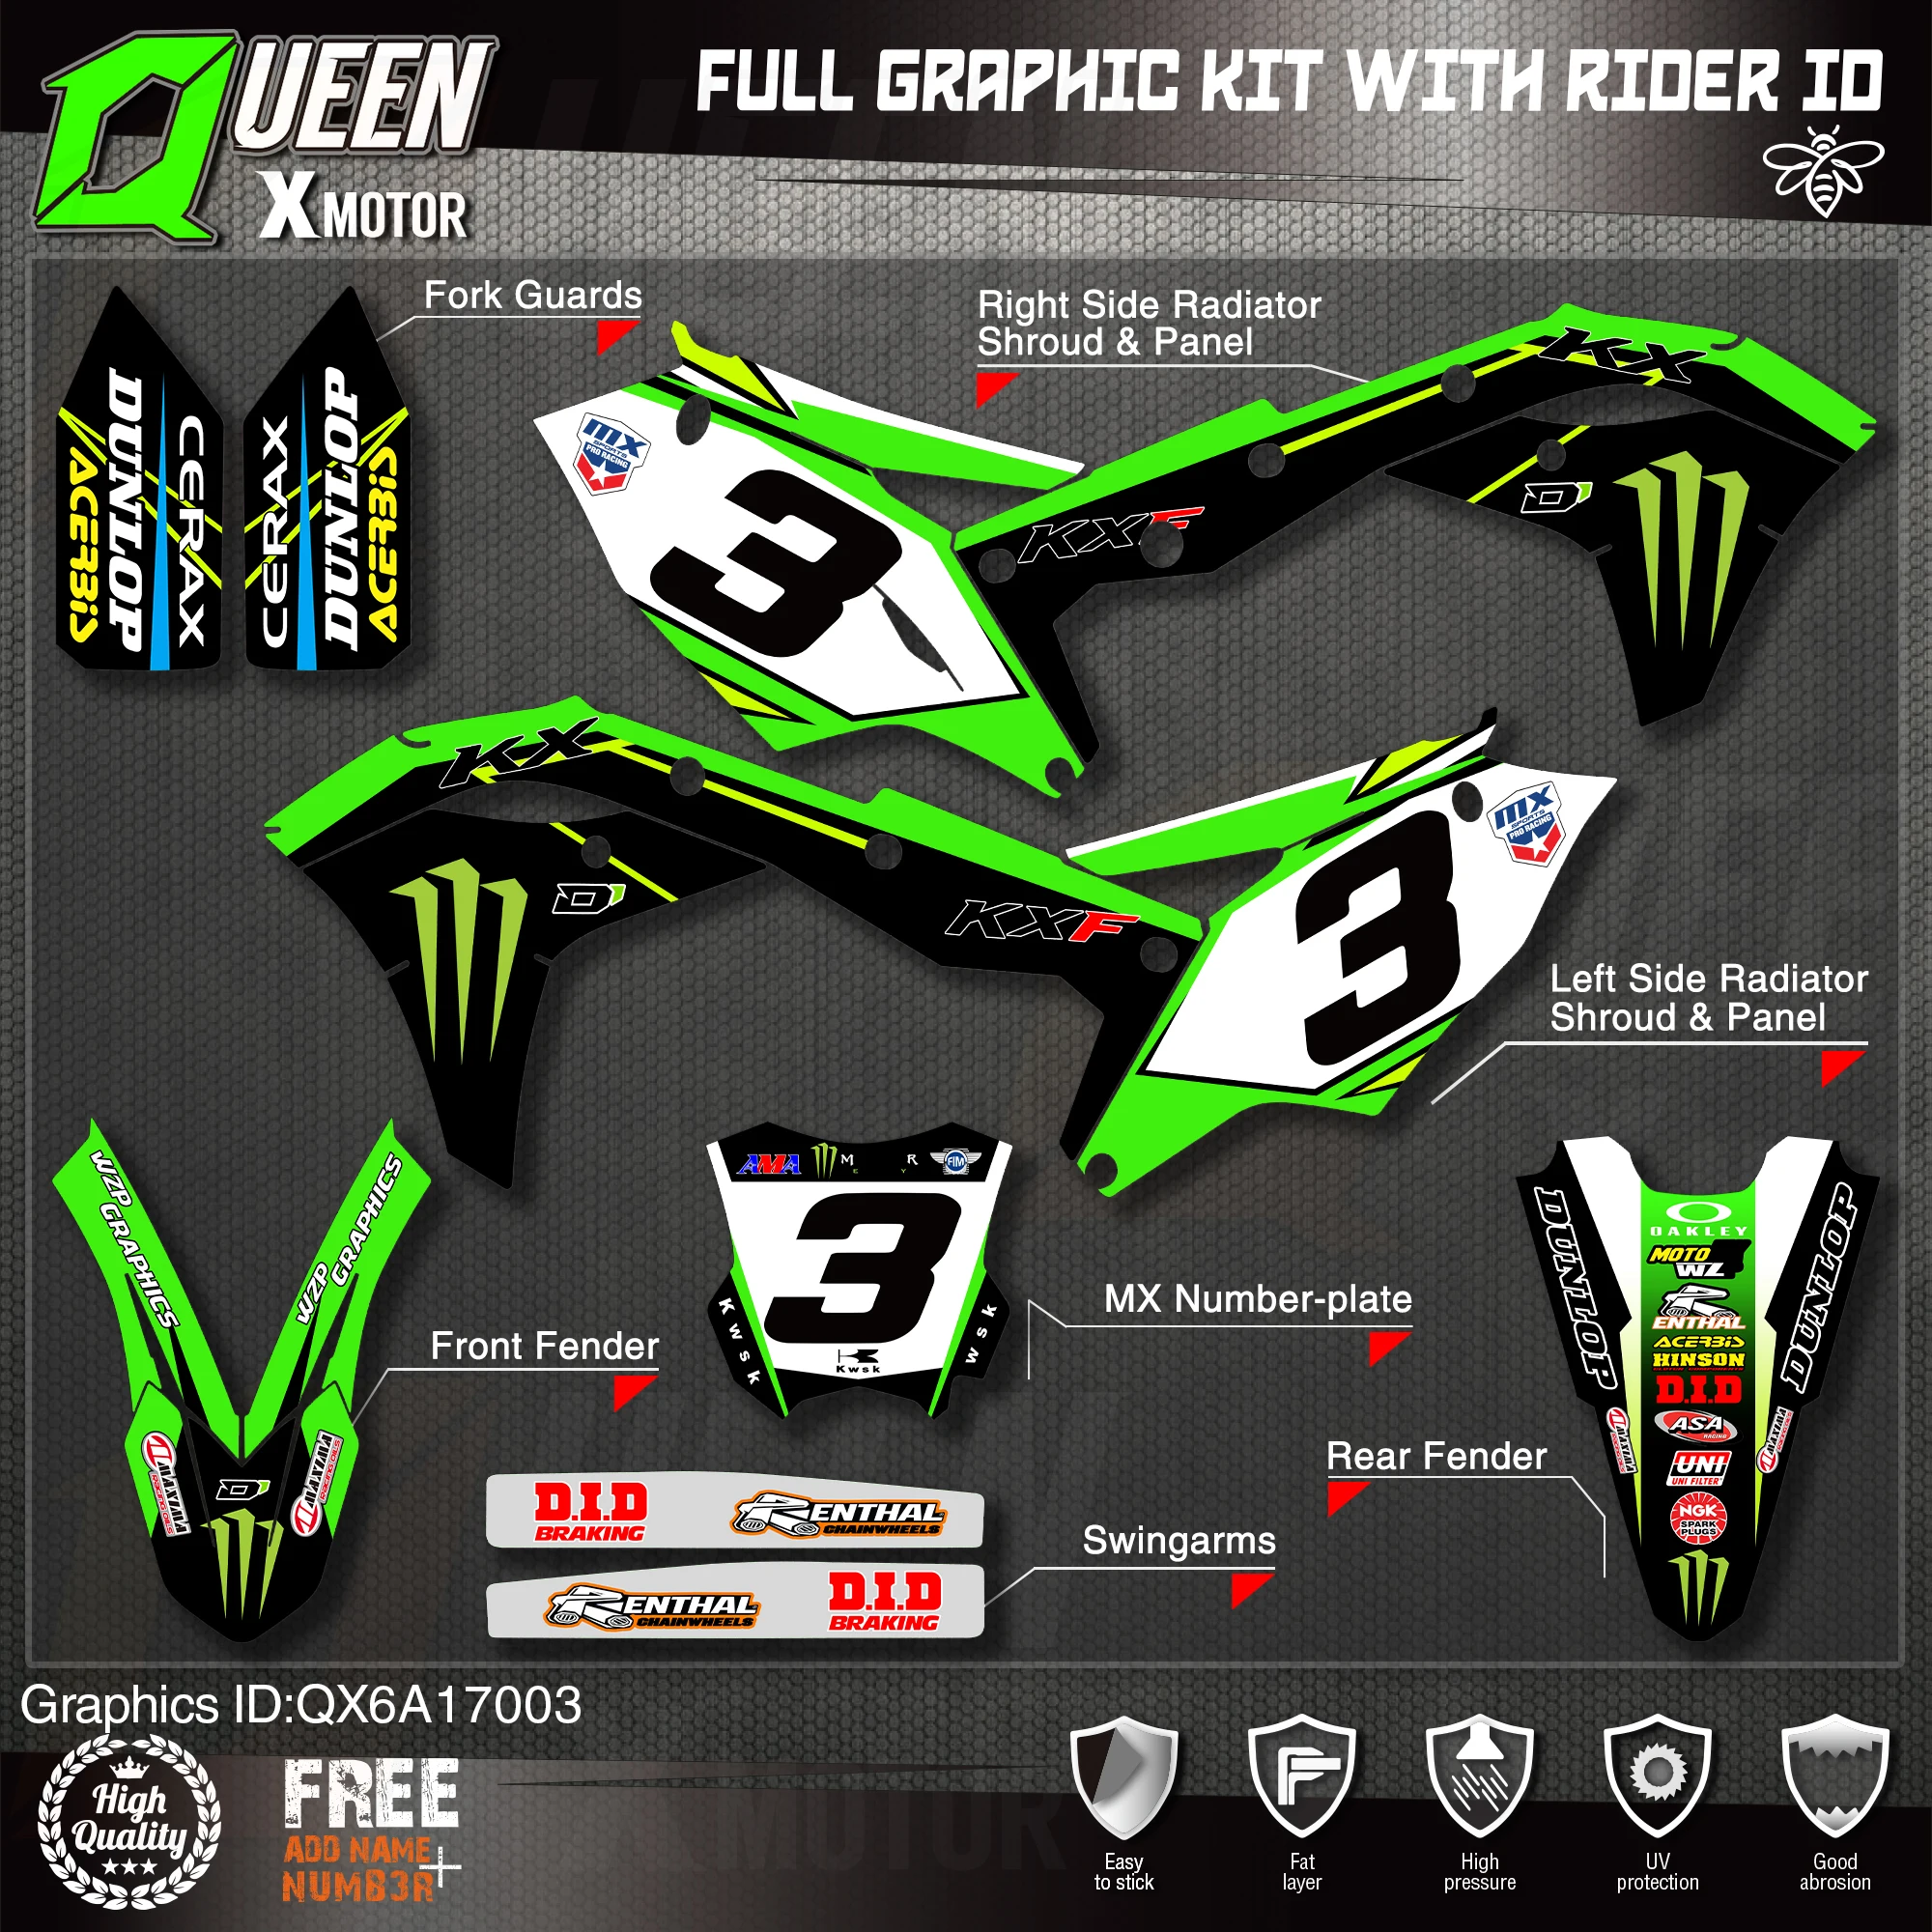 Queen X MOTOR Custom Team Graphics Decals Stickers Kit For Kawasaki Decal 2017 2018 2019 2020 KXF 250 003